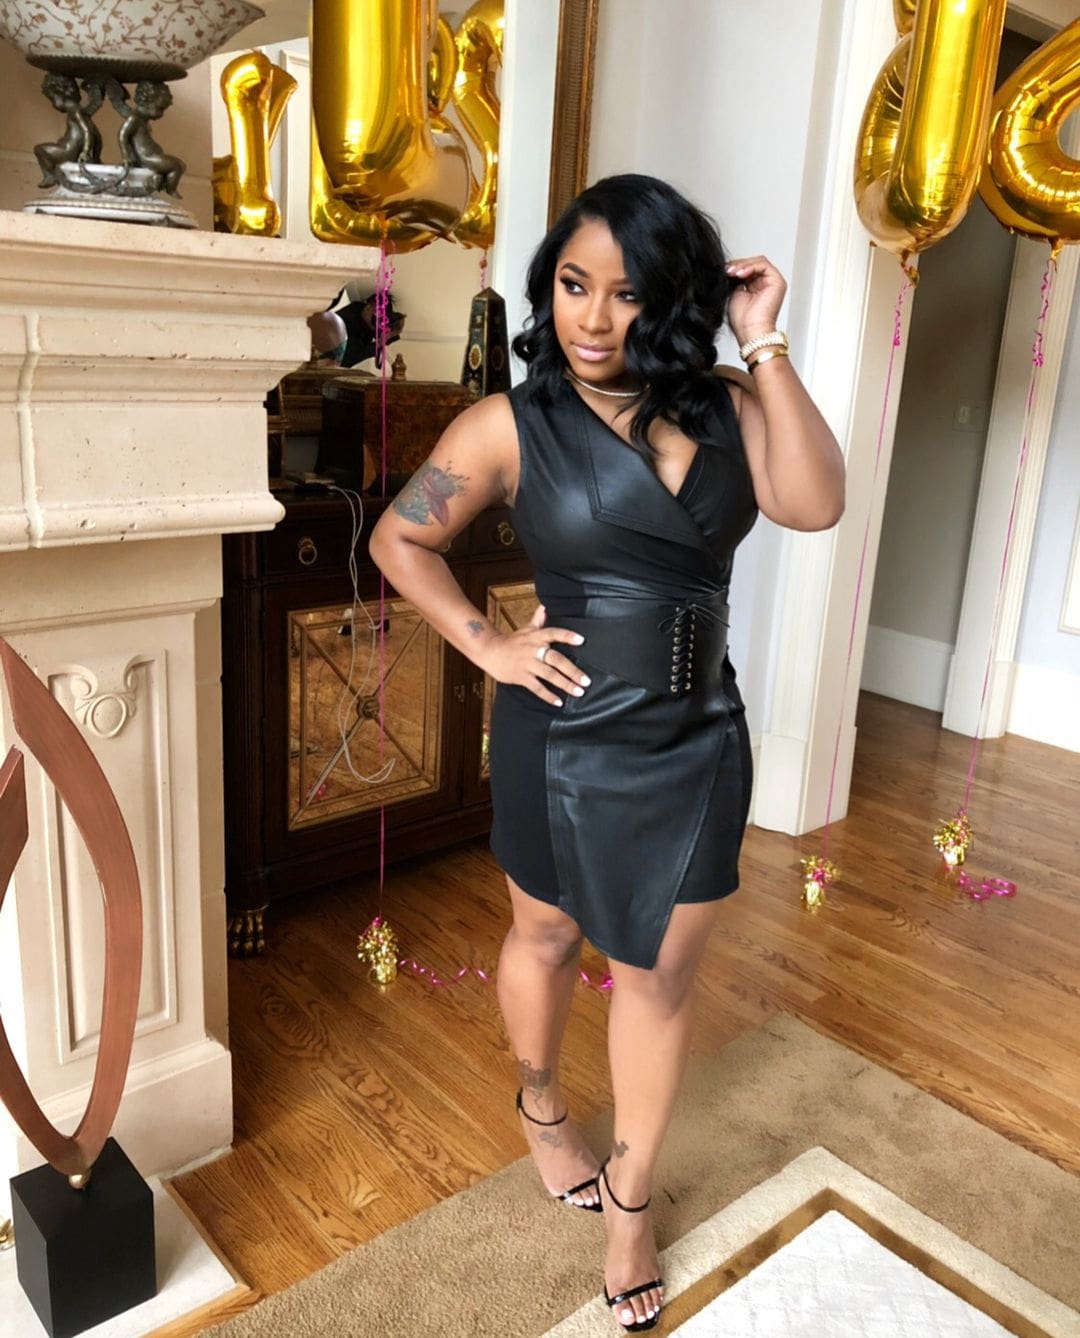 Toya Johnson Breaks The Internet With This BBH Commercial - See Her Rocking This Black Lingerie!